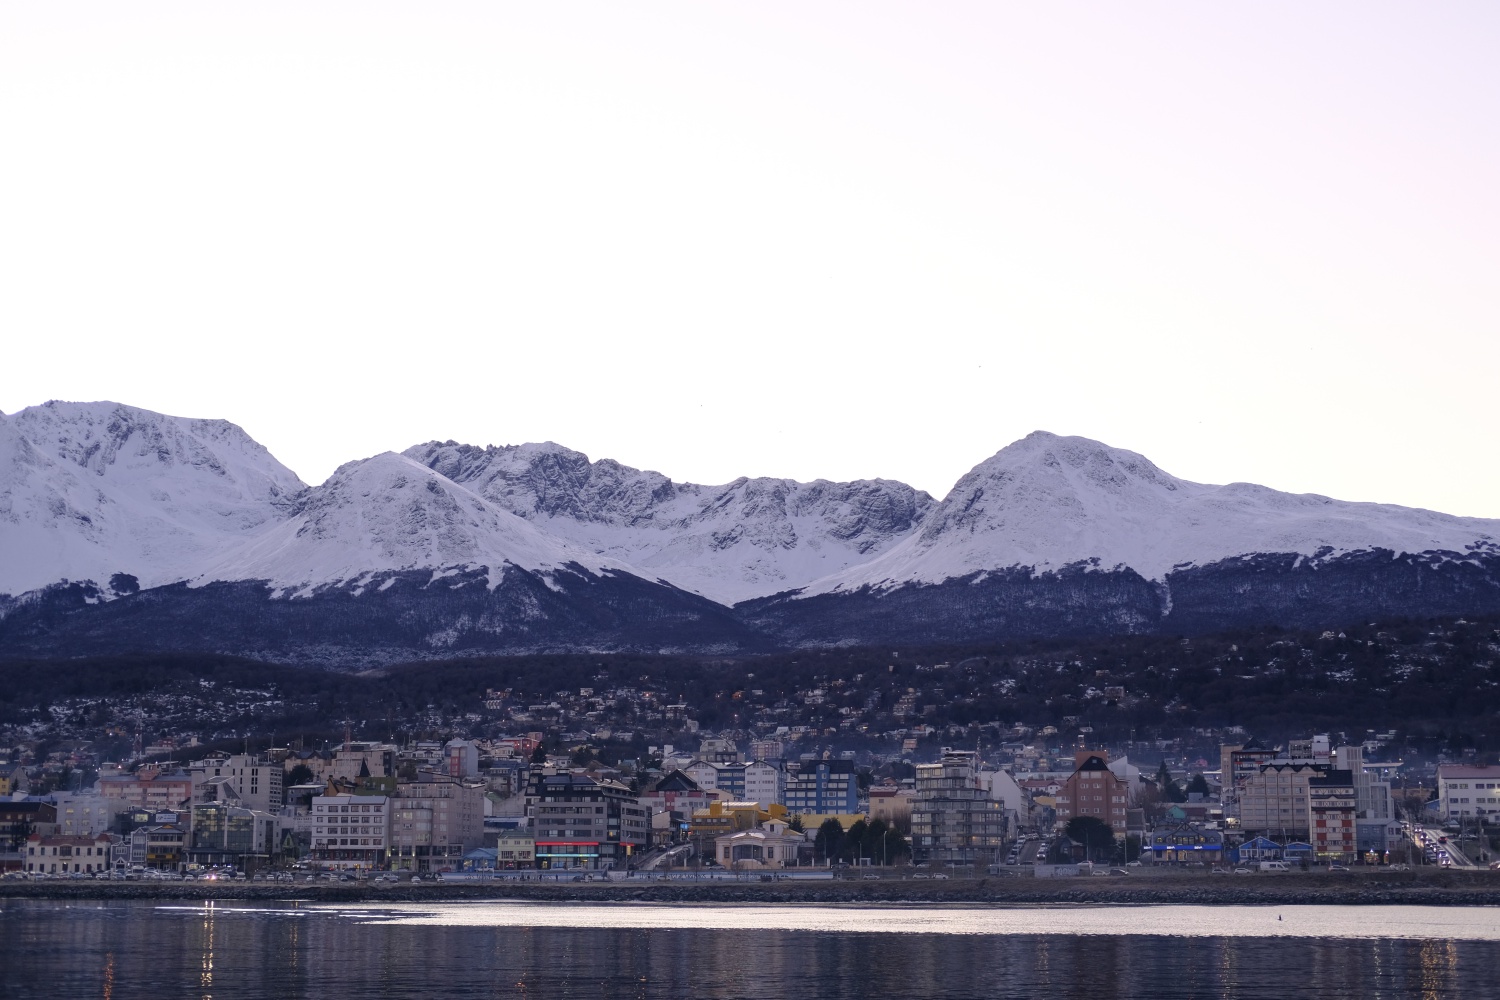 I like Ushuaia, it's a small town with a population of about 60,000 people.